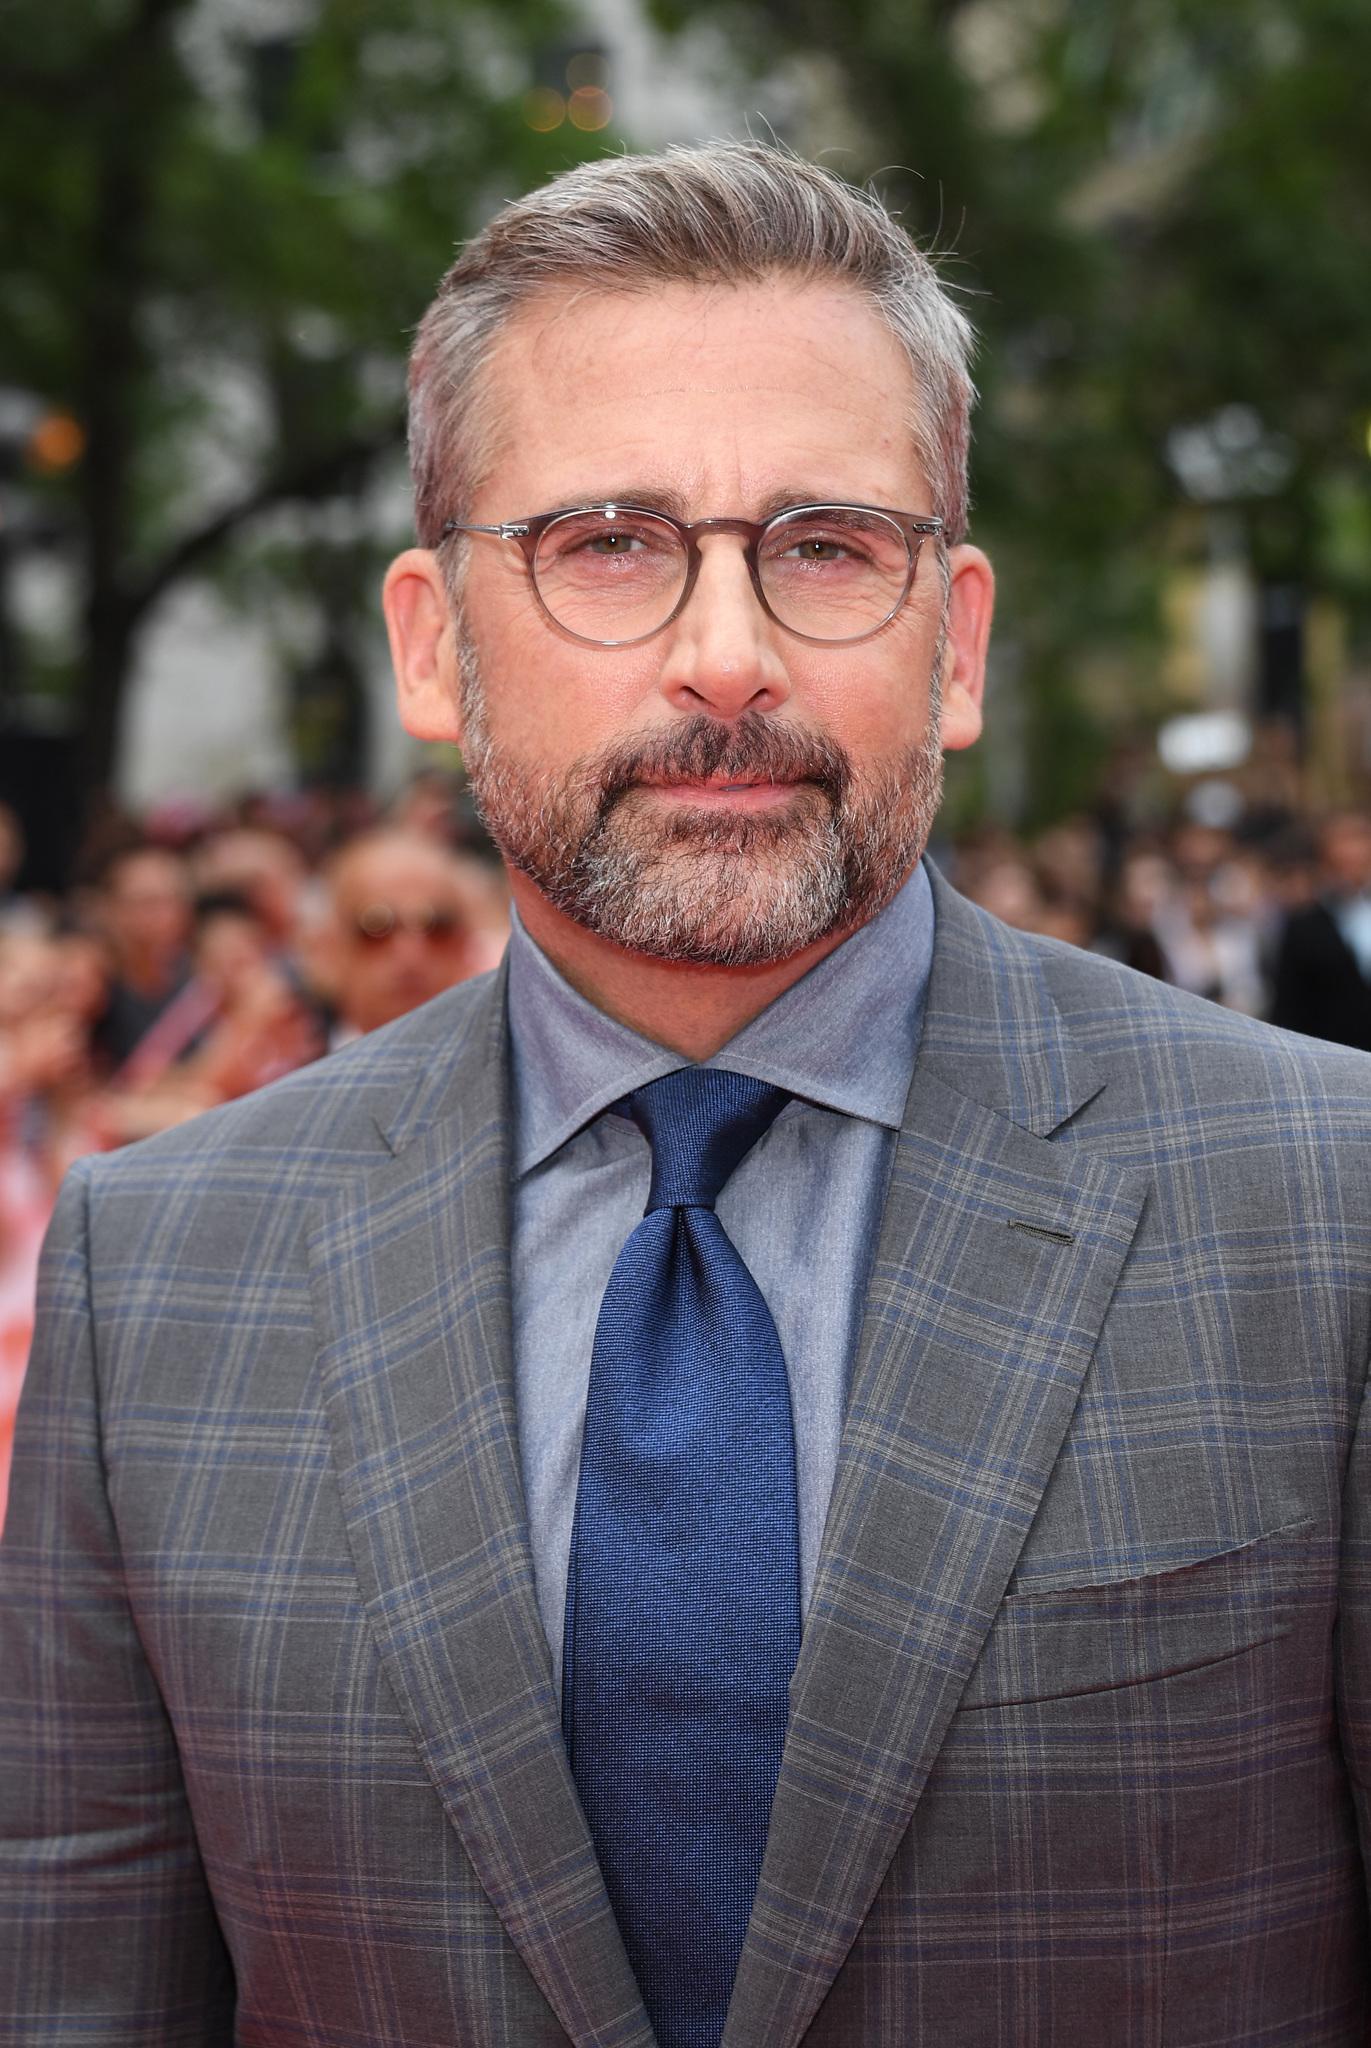 5 Fun Facts About BATTLE OF THE SEXES starring Steve Carrell